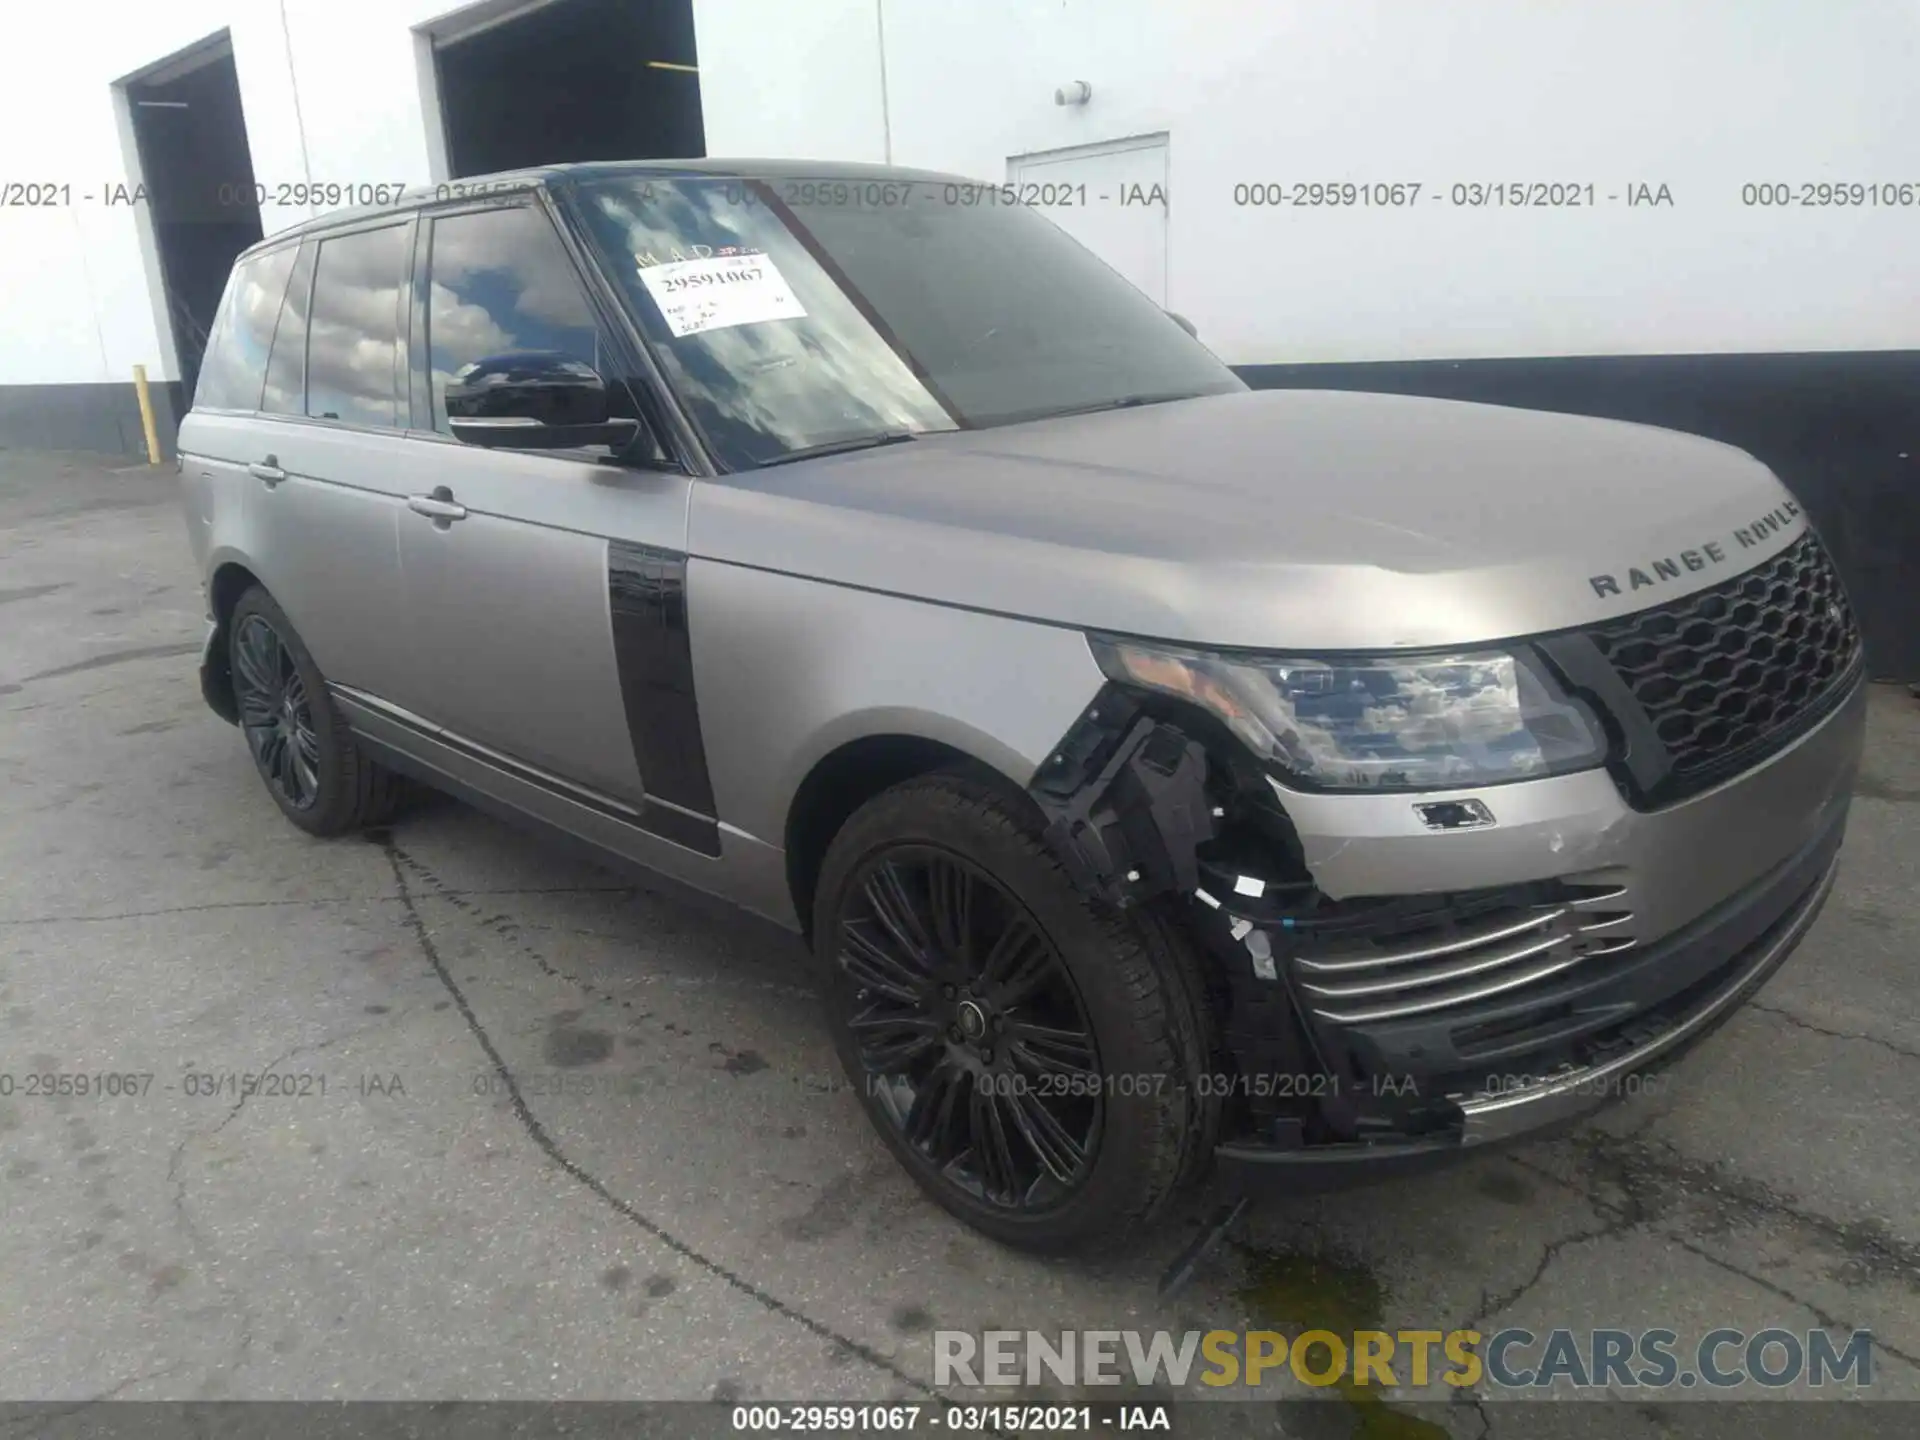 1 Photograph of a damaged car SALGS2SE9MA421320 LAND ROVER RANGE ROVER 2021